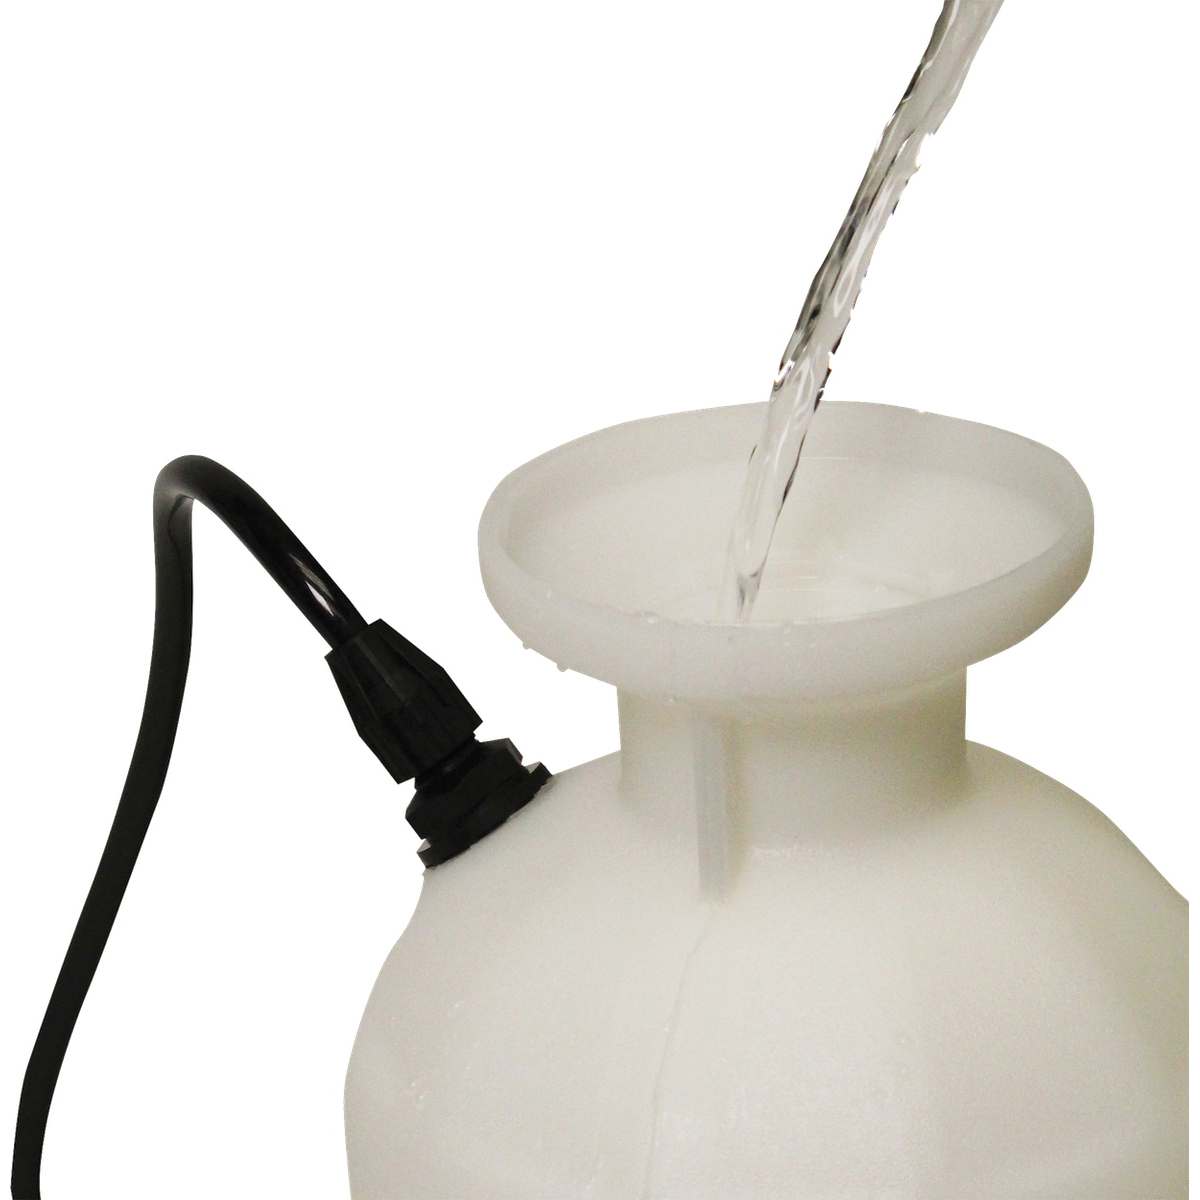 CHAPIN SureSpray 26010 Compression Sprayer, 1 gal Tank, Poly Tank, 34 in L Hose - 2